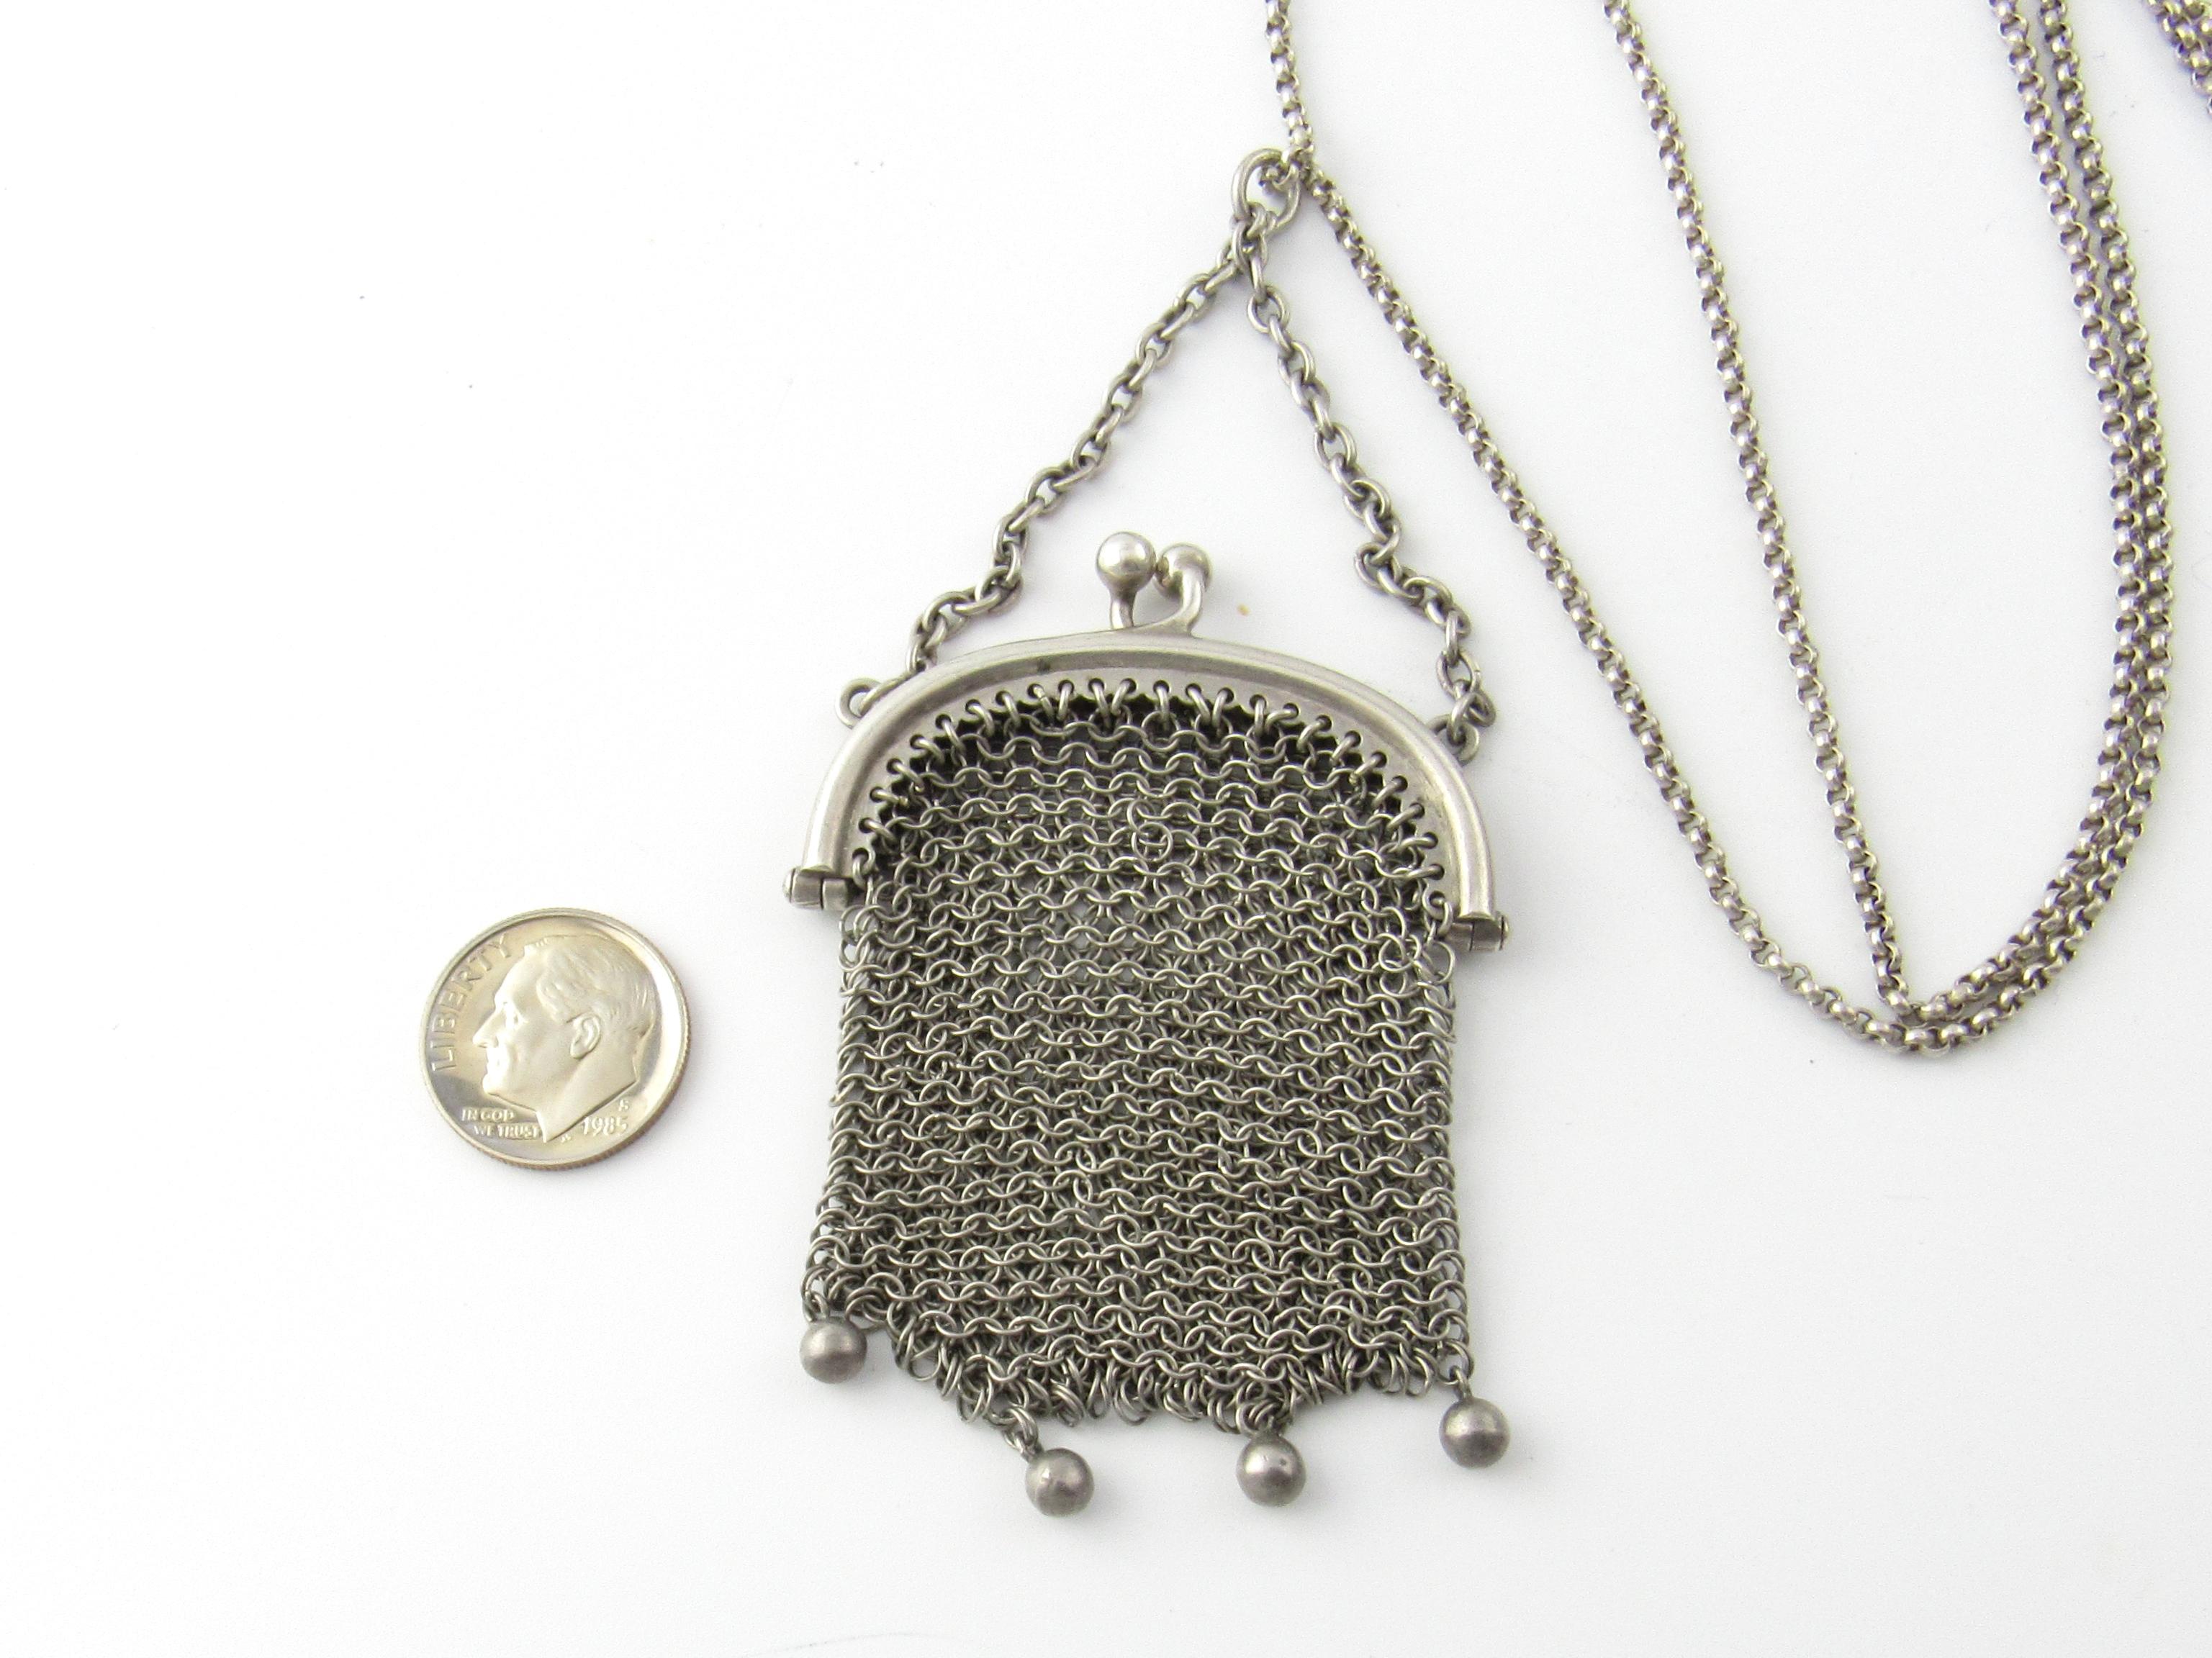 Women's Sterling Silver Mesh Purse on Chain Necklace